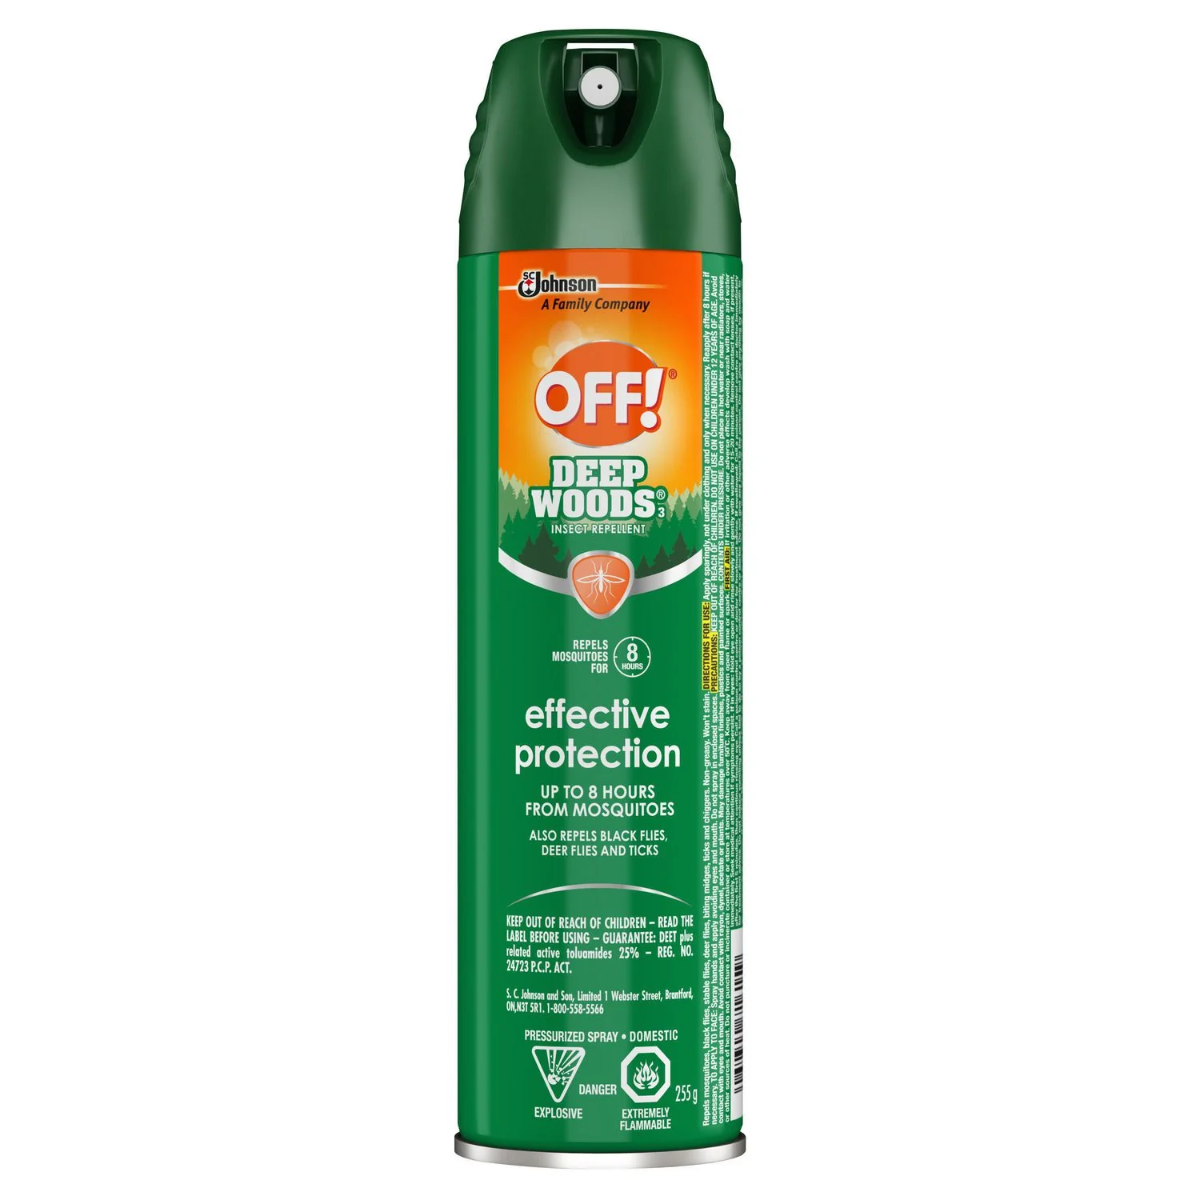 OFF! Deep Woods Insect Repellent (255g)